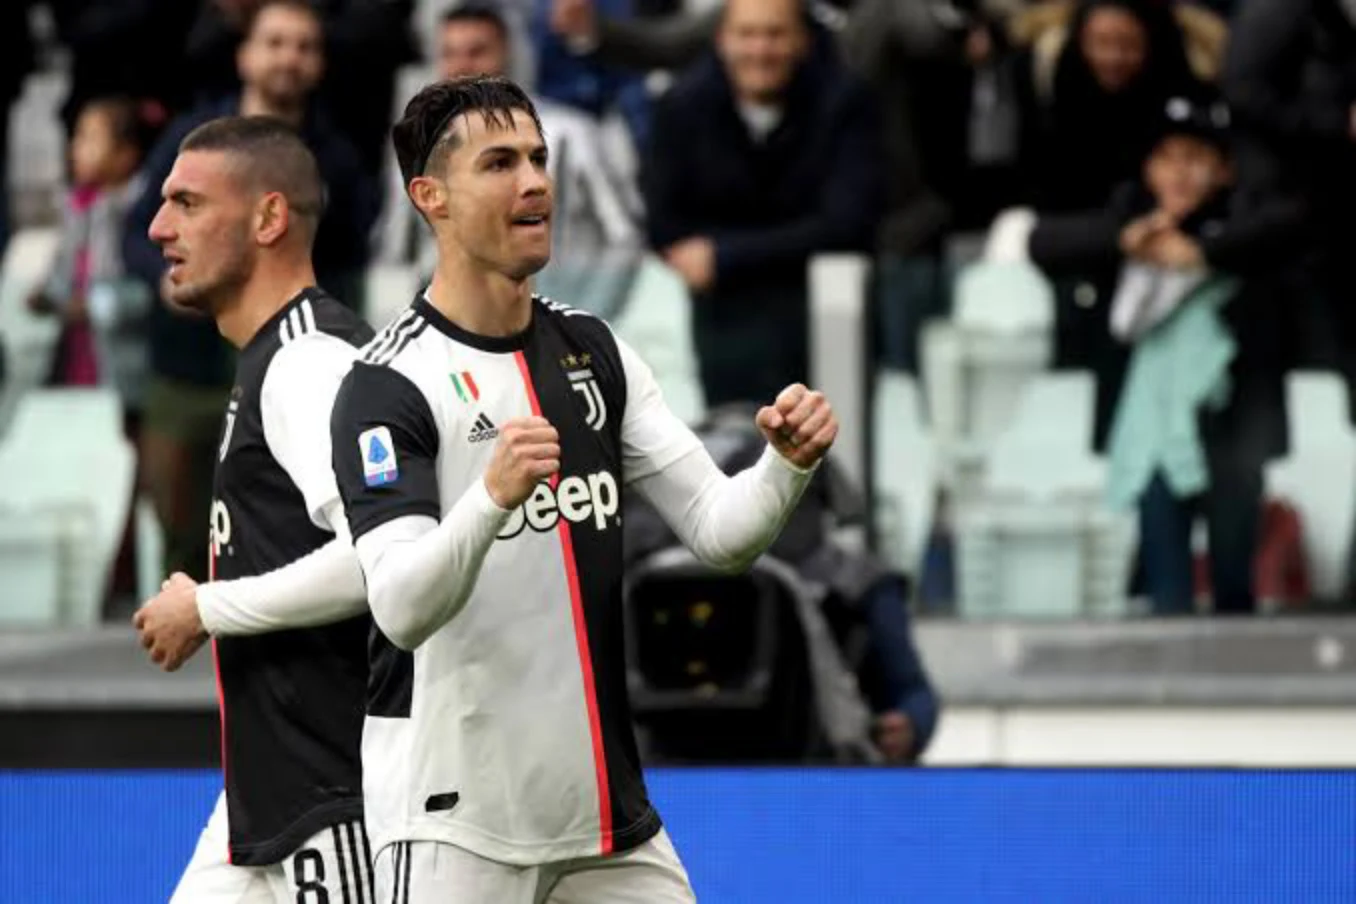 Juventus 3-1 Udinese: Ronaldo double sends Juve top with immense display